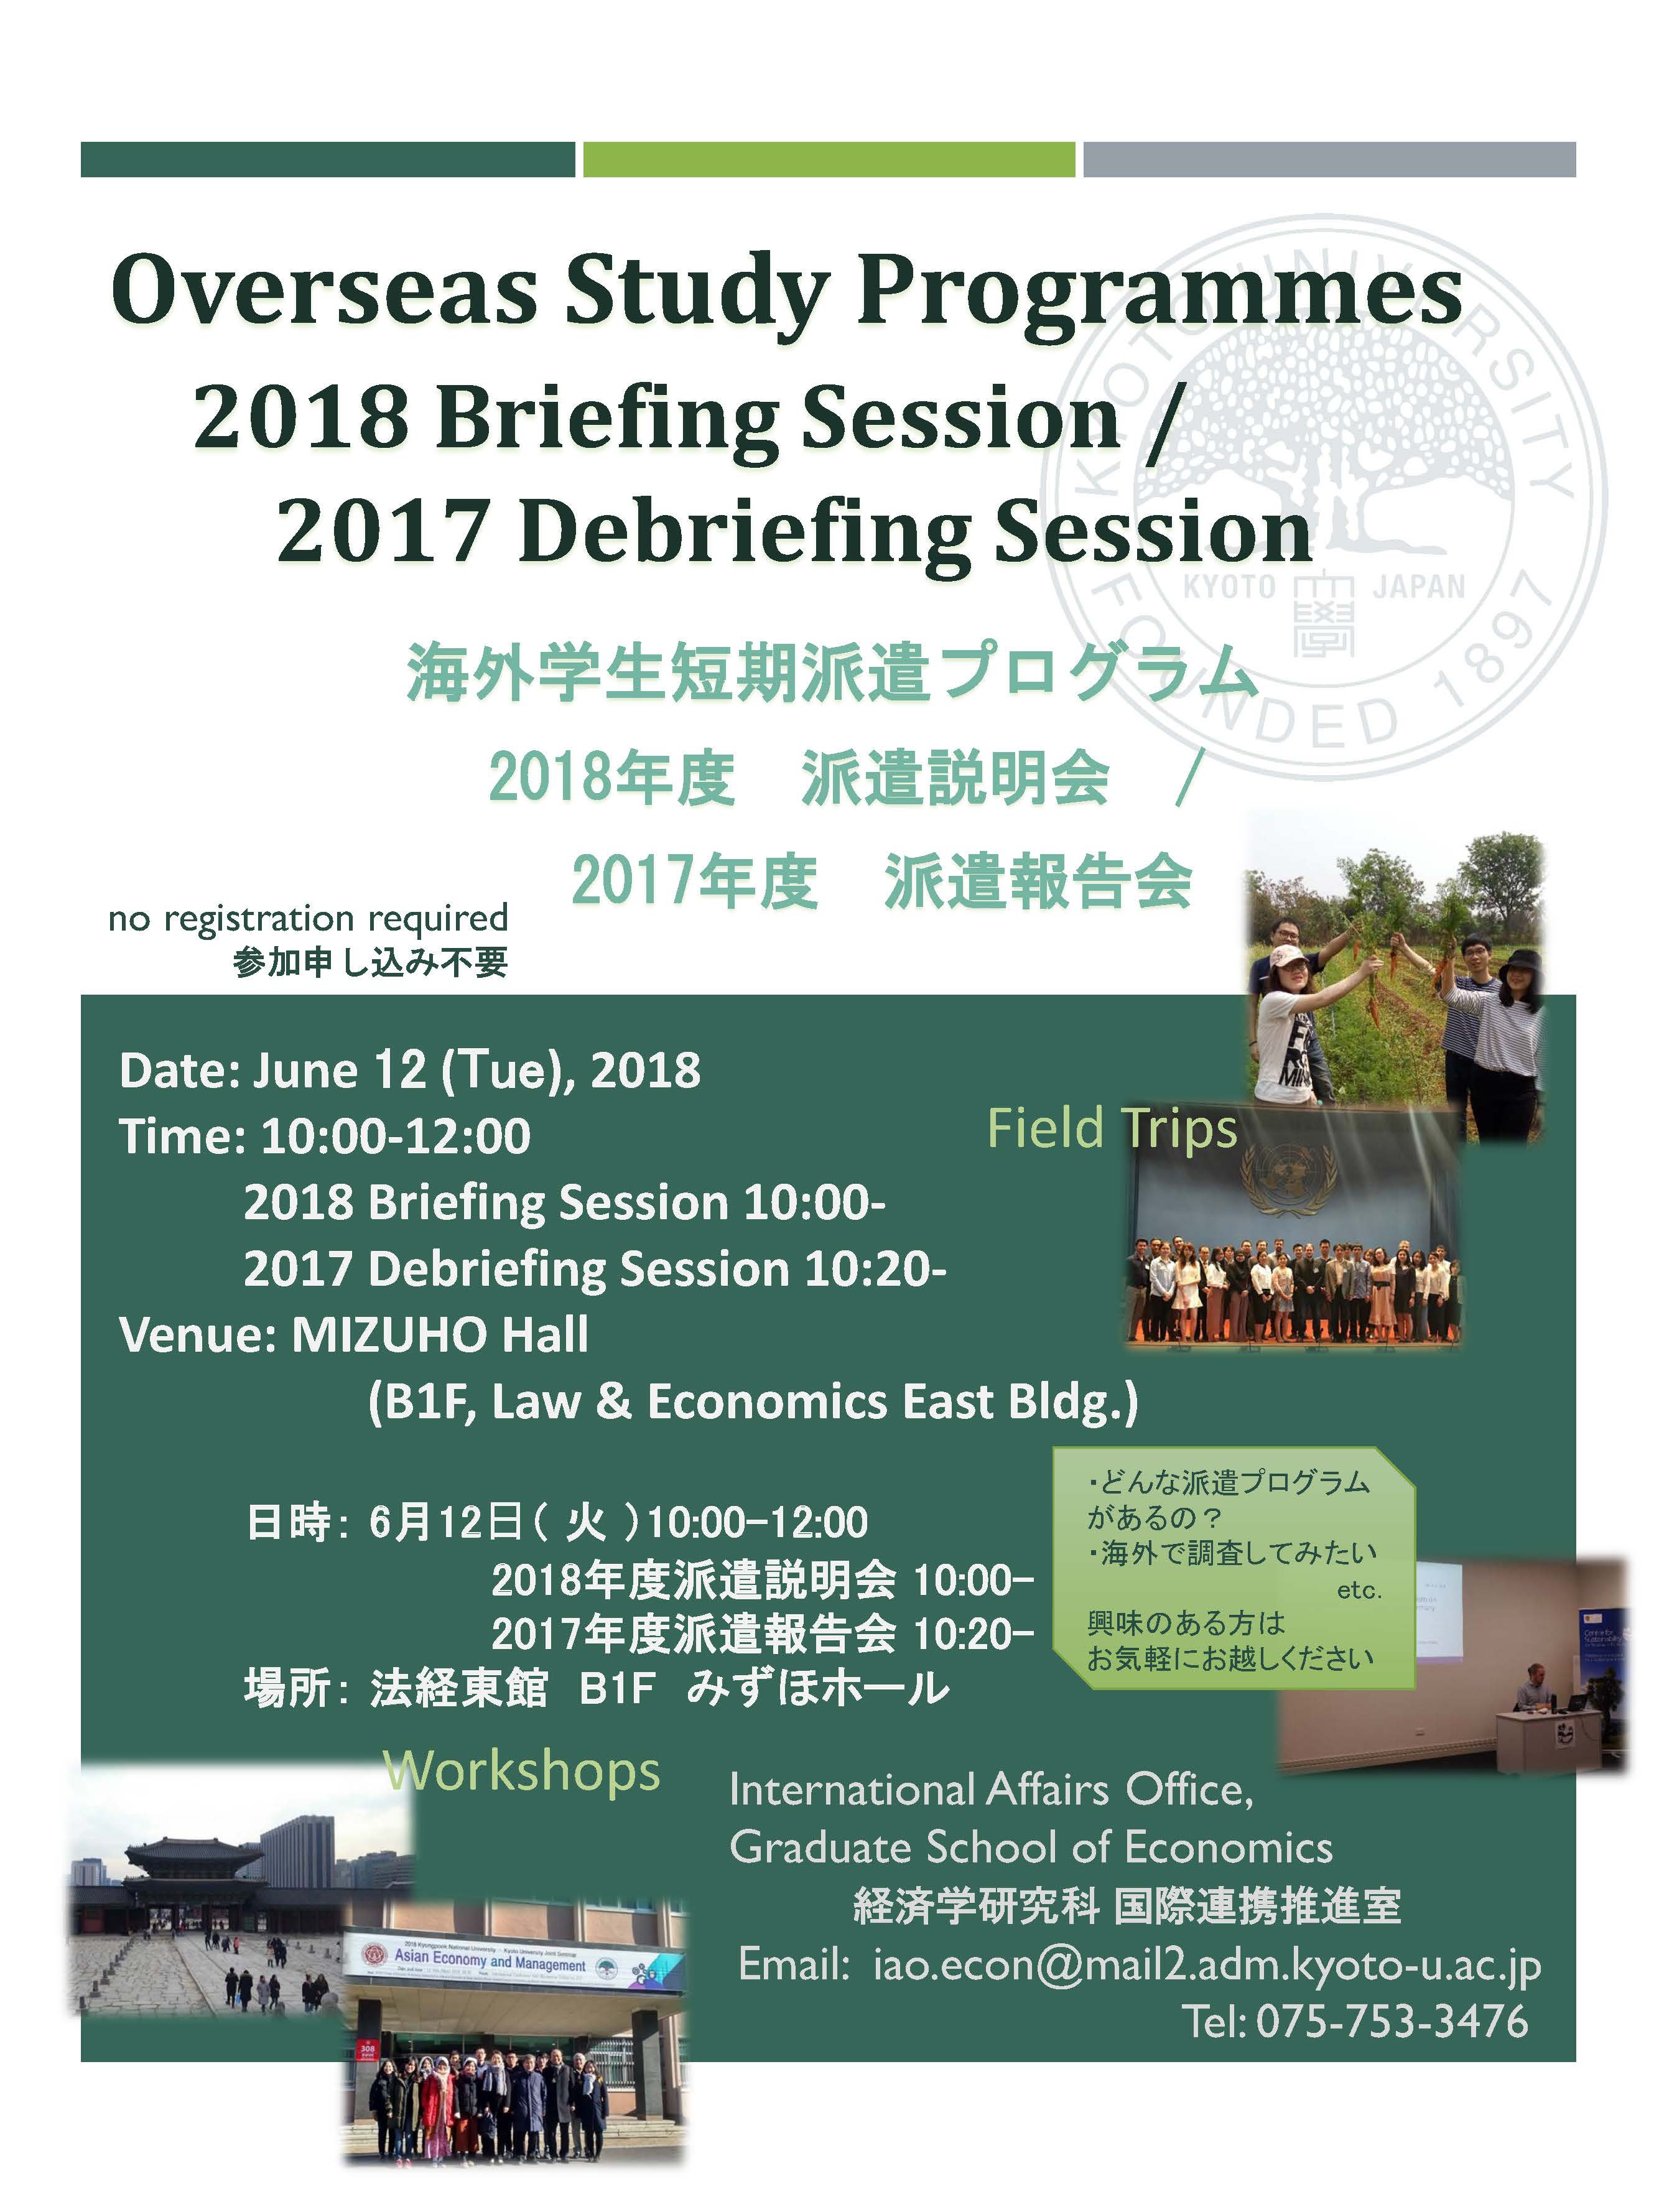 2018 Briefing and 2017 Debriefing Session